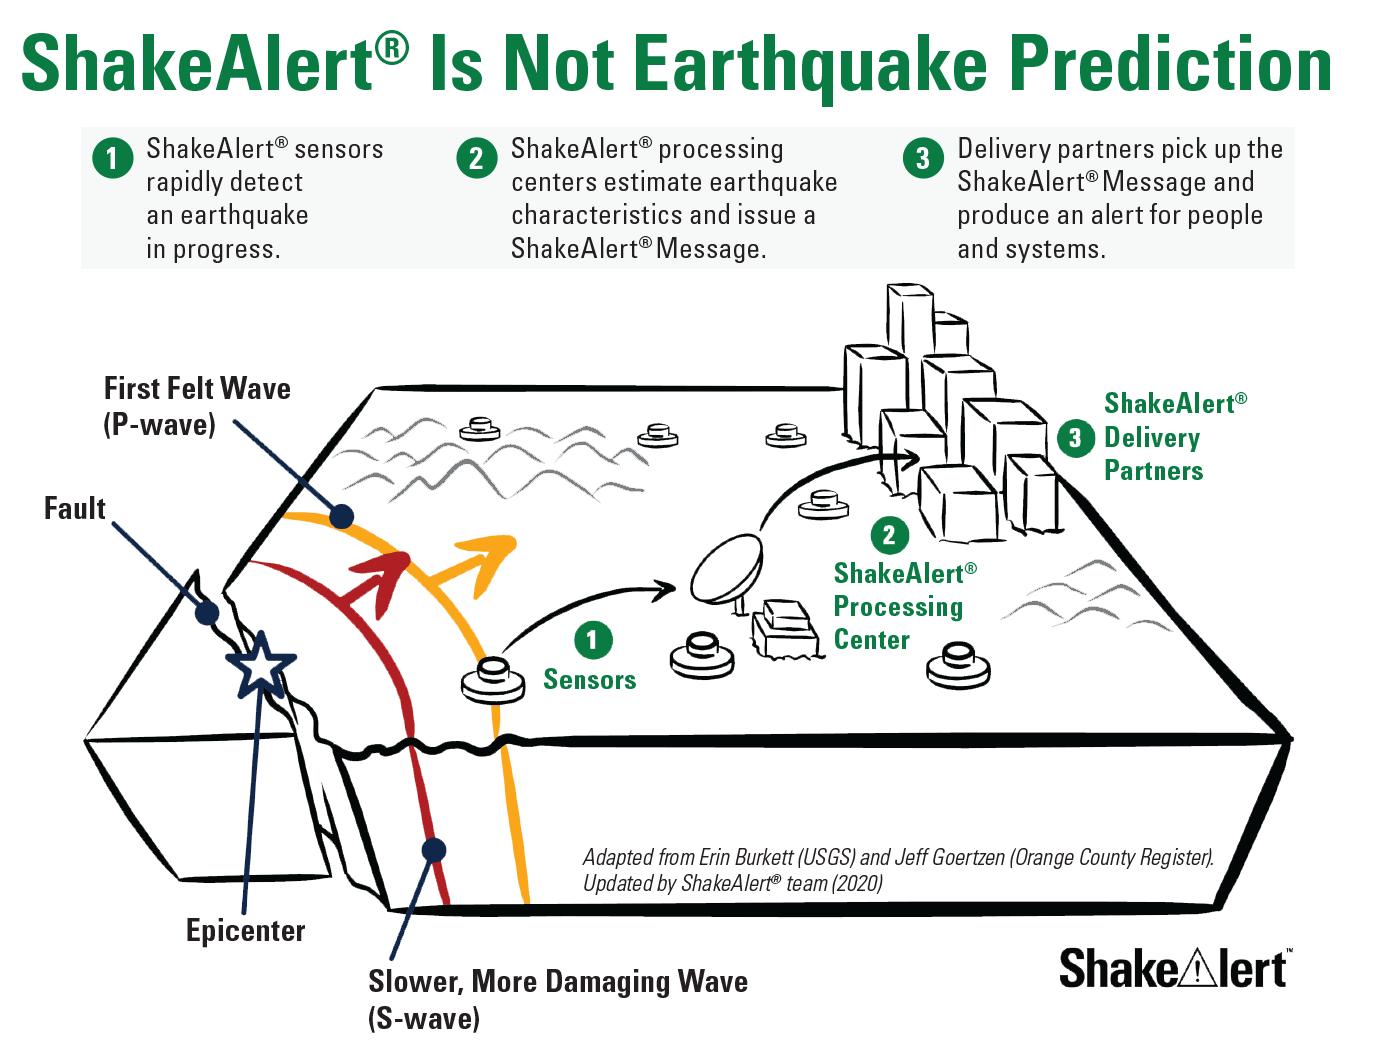 Figure 1. Diagram illustrating the ShakeAlert process. A star indicates the epicenter
                     of an earthquake along a fault. Two arcs appear to radiate around the fault and each
                     one is labeled as “First Felt Wave (P-wave)” or “Slower, More Damaging Wave, (S-wave)”.
                     The two arcs have arrows pointing toward stations labeled as “Sensors” (seismometers
                     in this case). An arrow points from the sensors to a satellite dish labeled as “ShakeAlert
                     Processing Center.” An arrow points from the processing center to a set of rectangular
                     buildings labeled as “ShakeAlert Delivery Partners.”